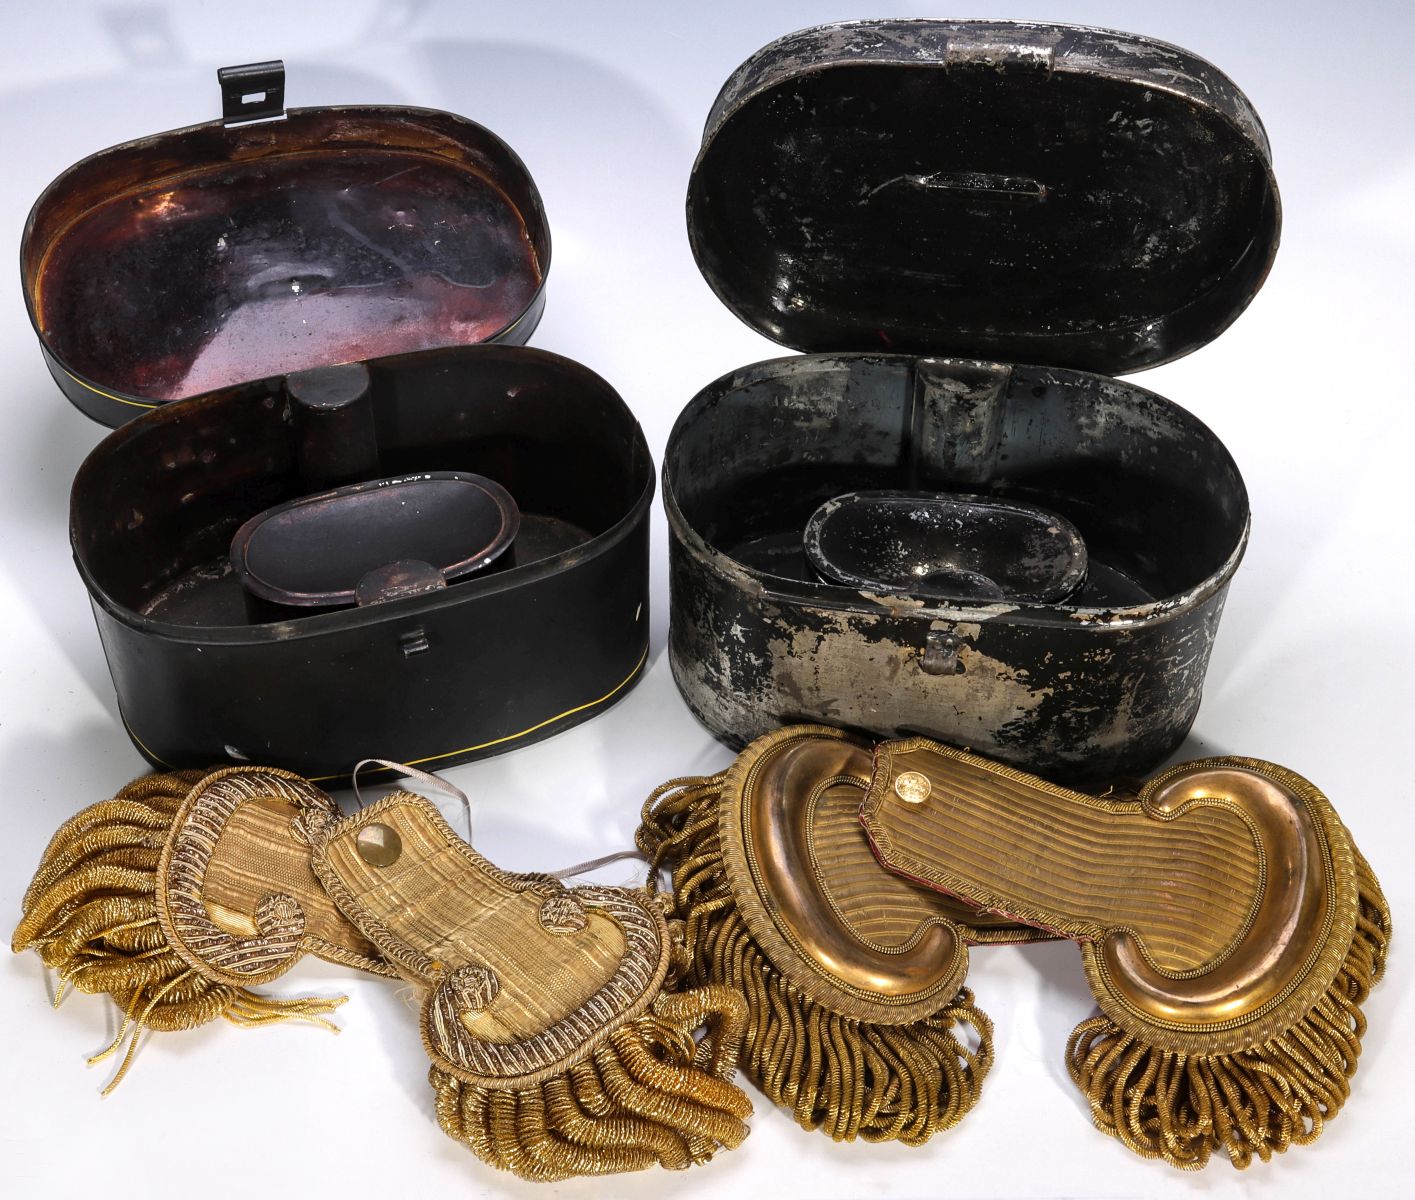 TWO PAIR 19TH CENTURY GOLD EPAULETS IN TOLE BOXES